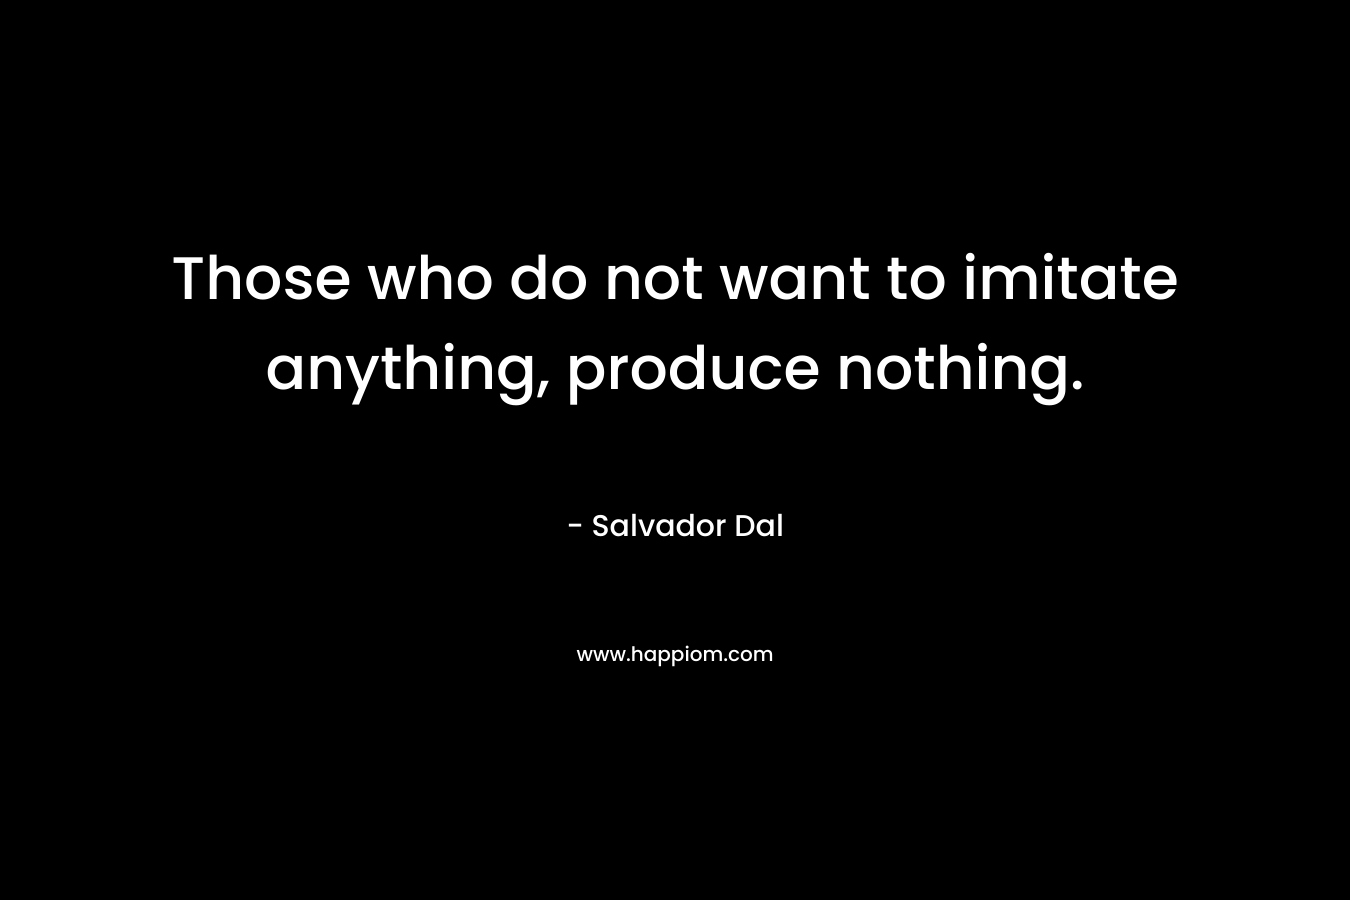 Those who do not want to imitate anything, produce nothing. – Salvador Dal